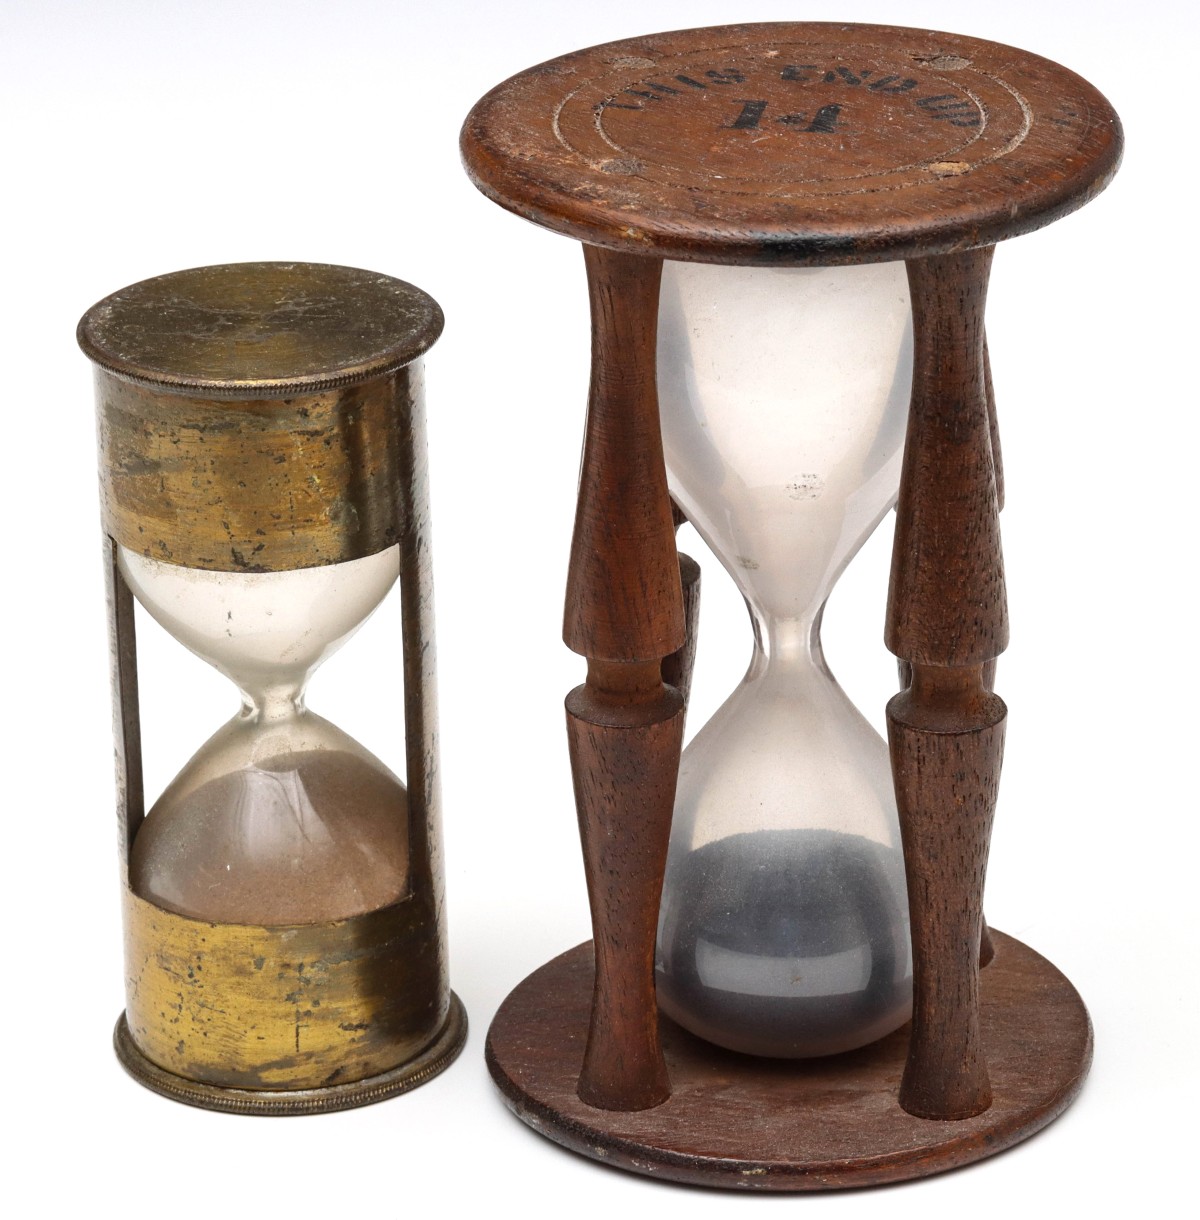 TWO 19TH C. MARINE SANDGLASS TIMEPIECES BRASS AND WOOD